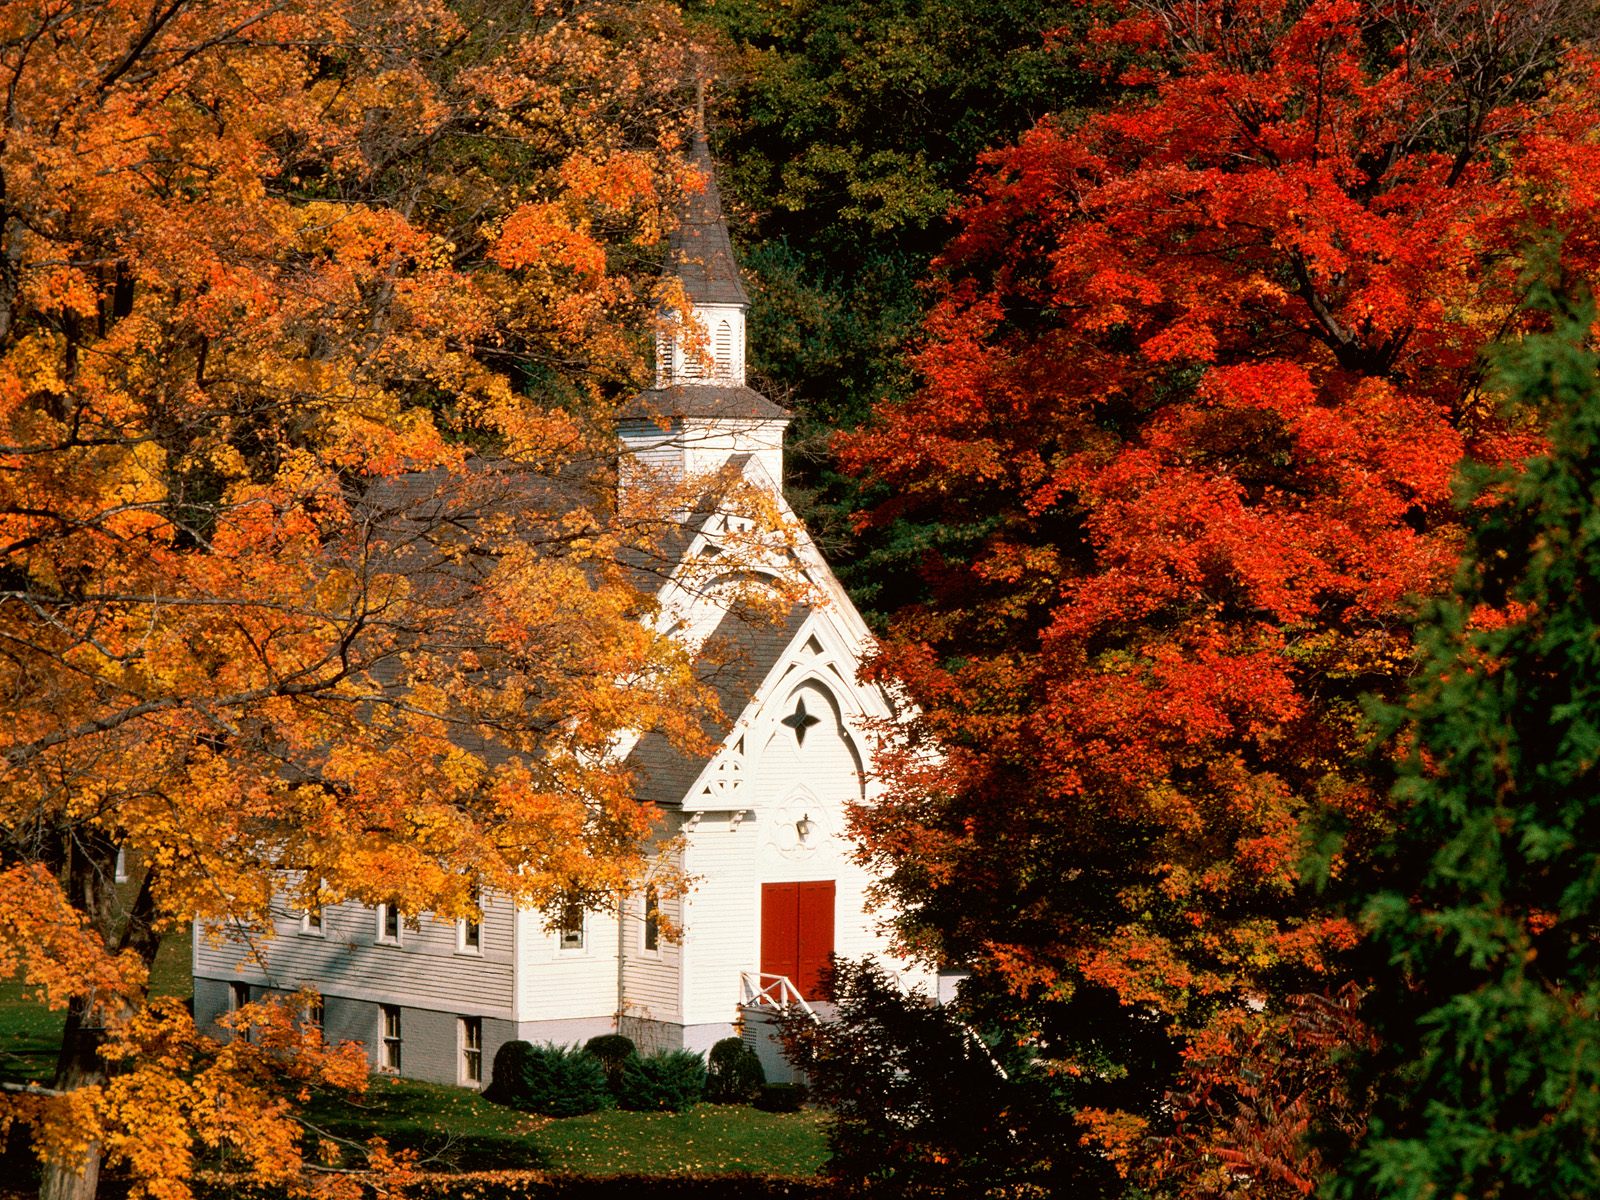    The Best Fall Destinations in the World   Vermont New England   3